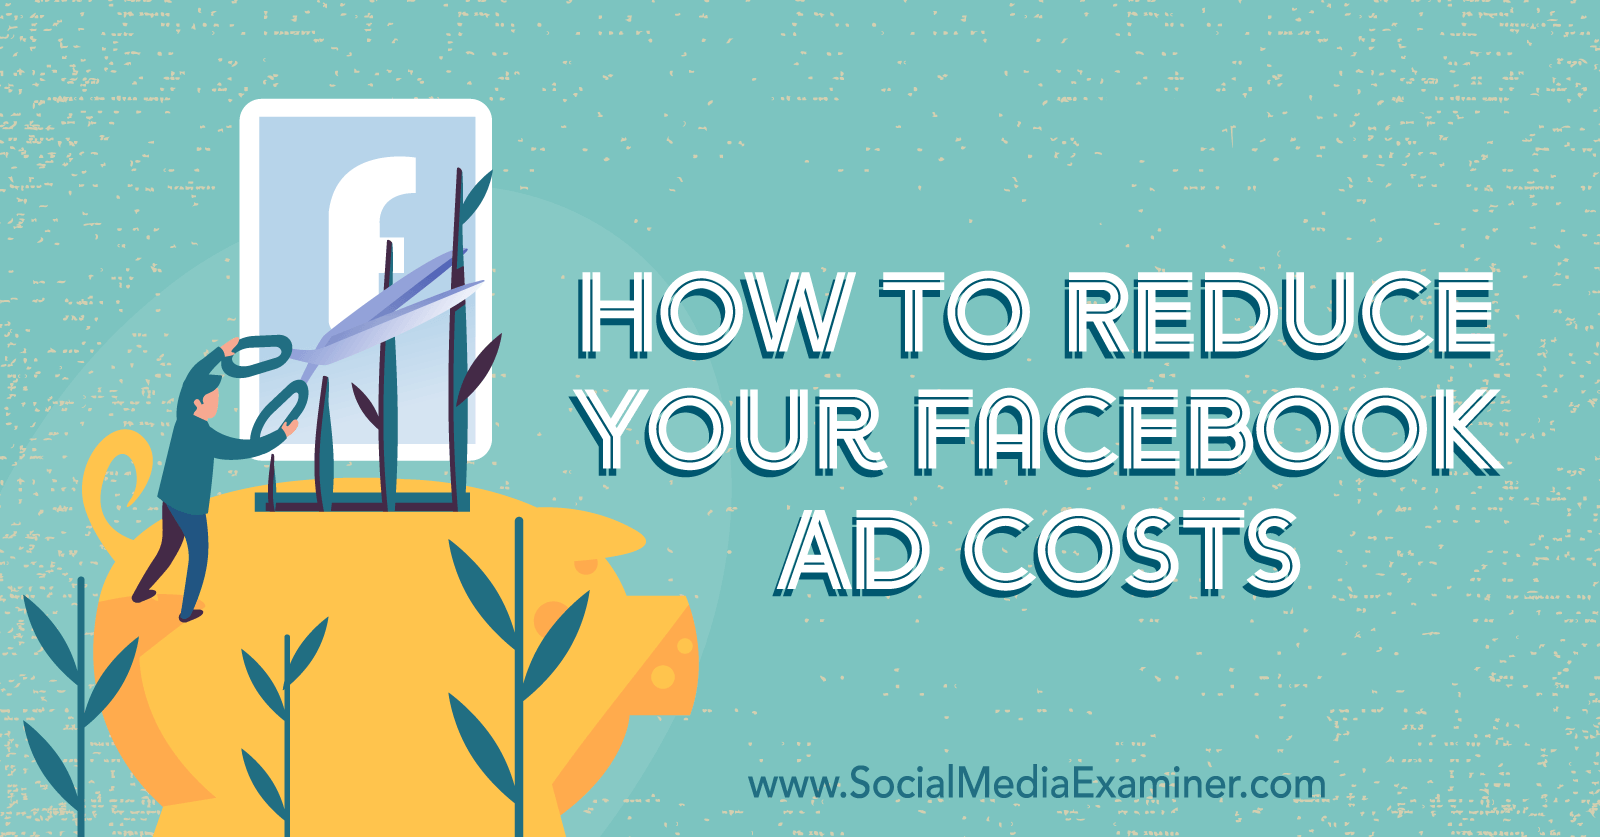 How to Reduce Your Facebook Ad Costs featuring insights from Emily Hirsh on the Social Media Marketing Podcast.